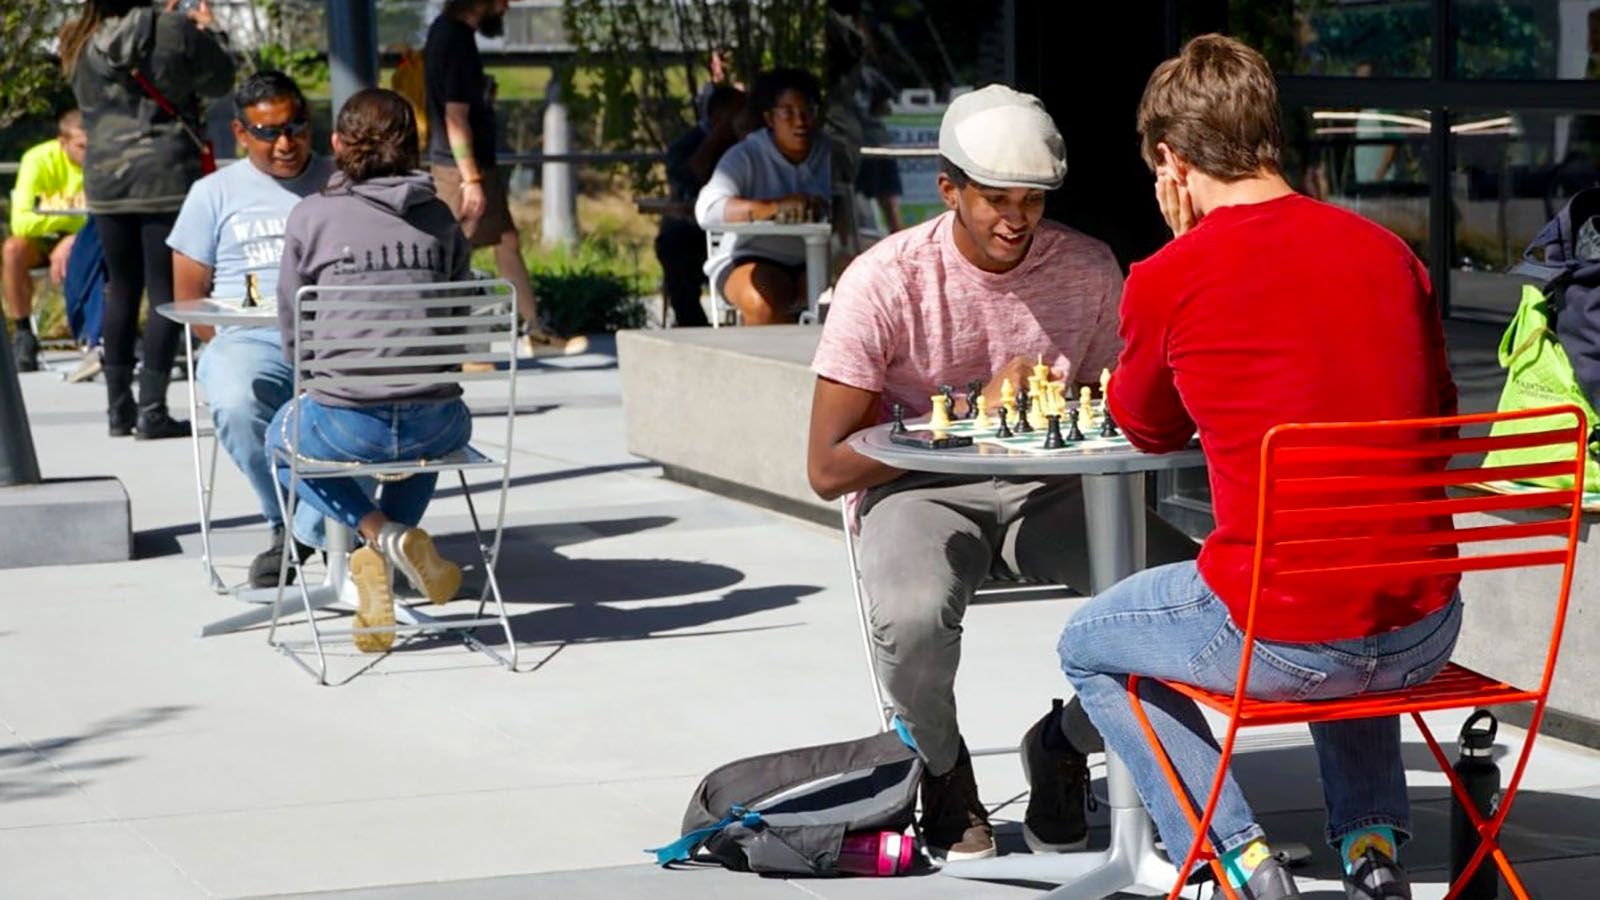 Enjoy chess and riverfront view Sept. 18 at Promenade Park.